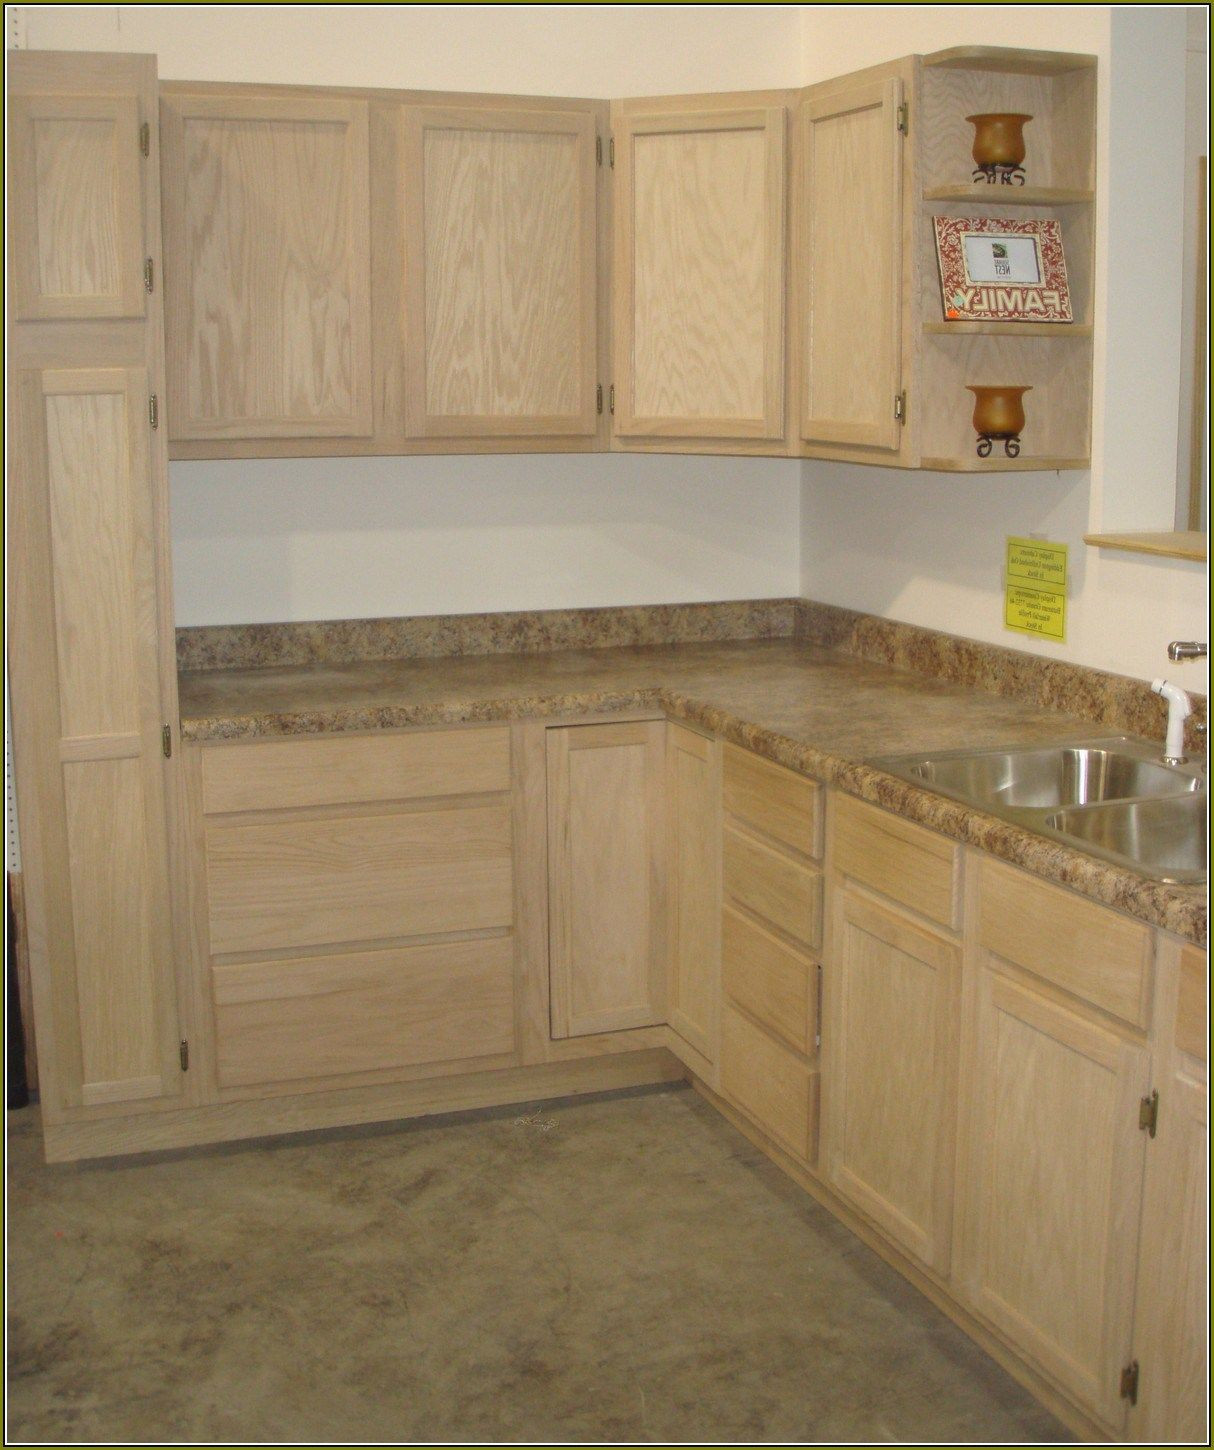 lowes hardwood floor finish of home improvements refference unfinished pine cabinets home depot pertaining to home improvements refference unfinished pine cabinets home depot kitchen cabinets assemble home depot lowes kitchen cabinets